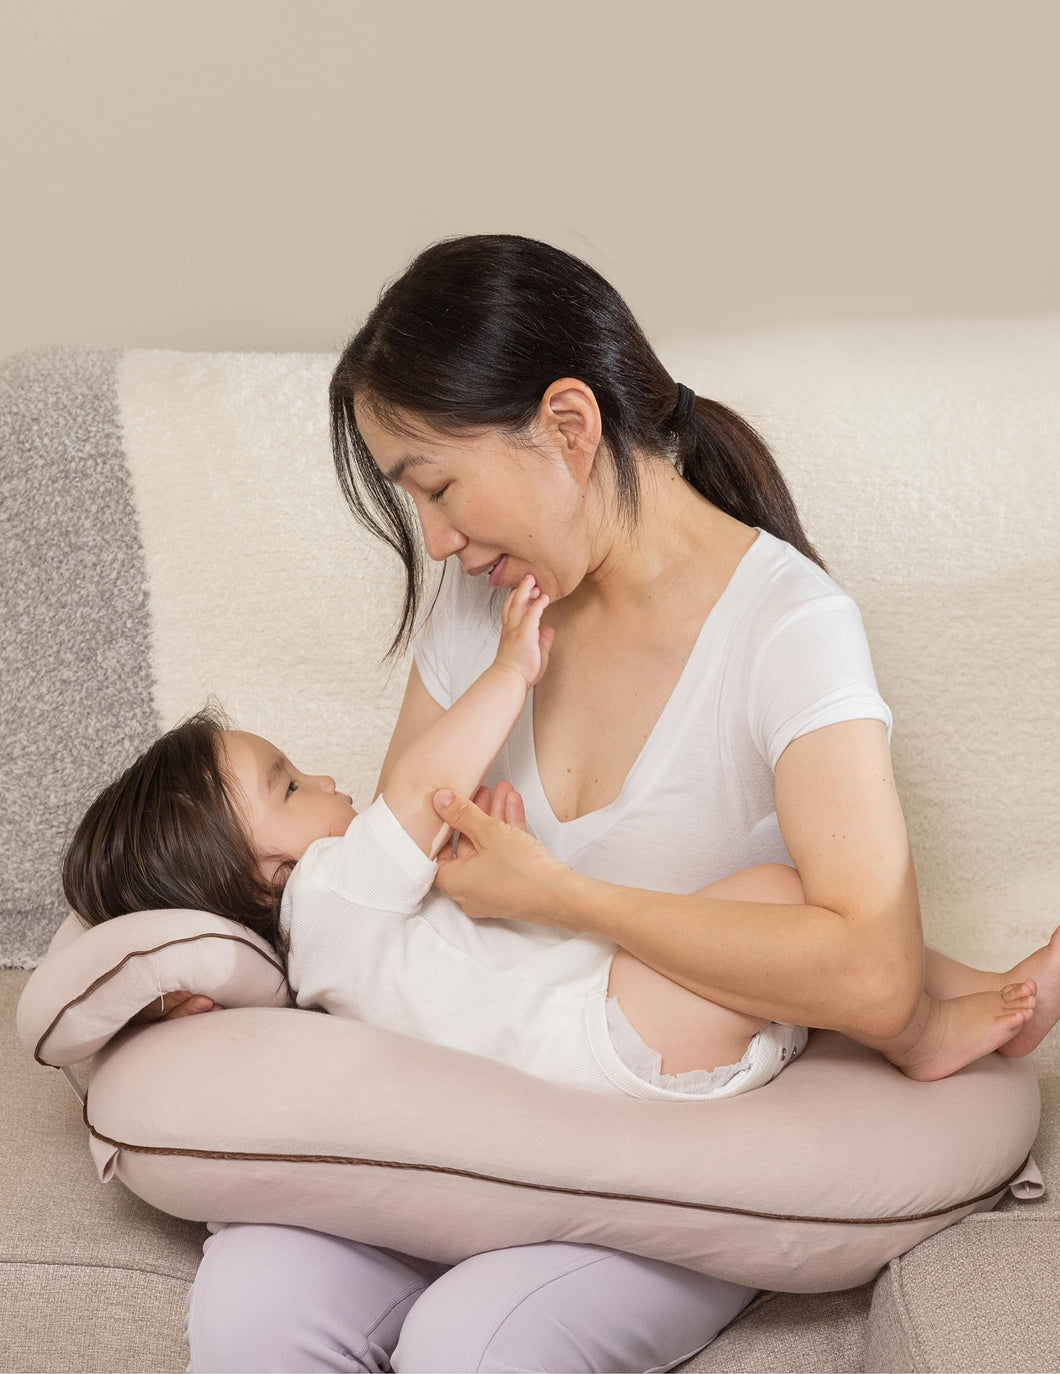 Pharmedoc Nursing Pillow for Breastfeeding - With Headrest & Adjustable Waist Straps - Removable Cover